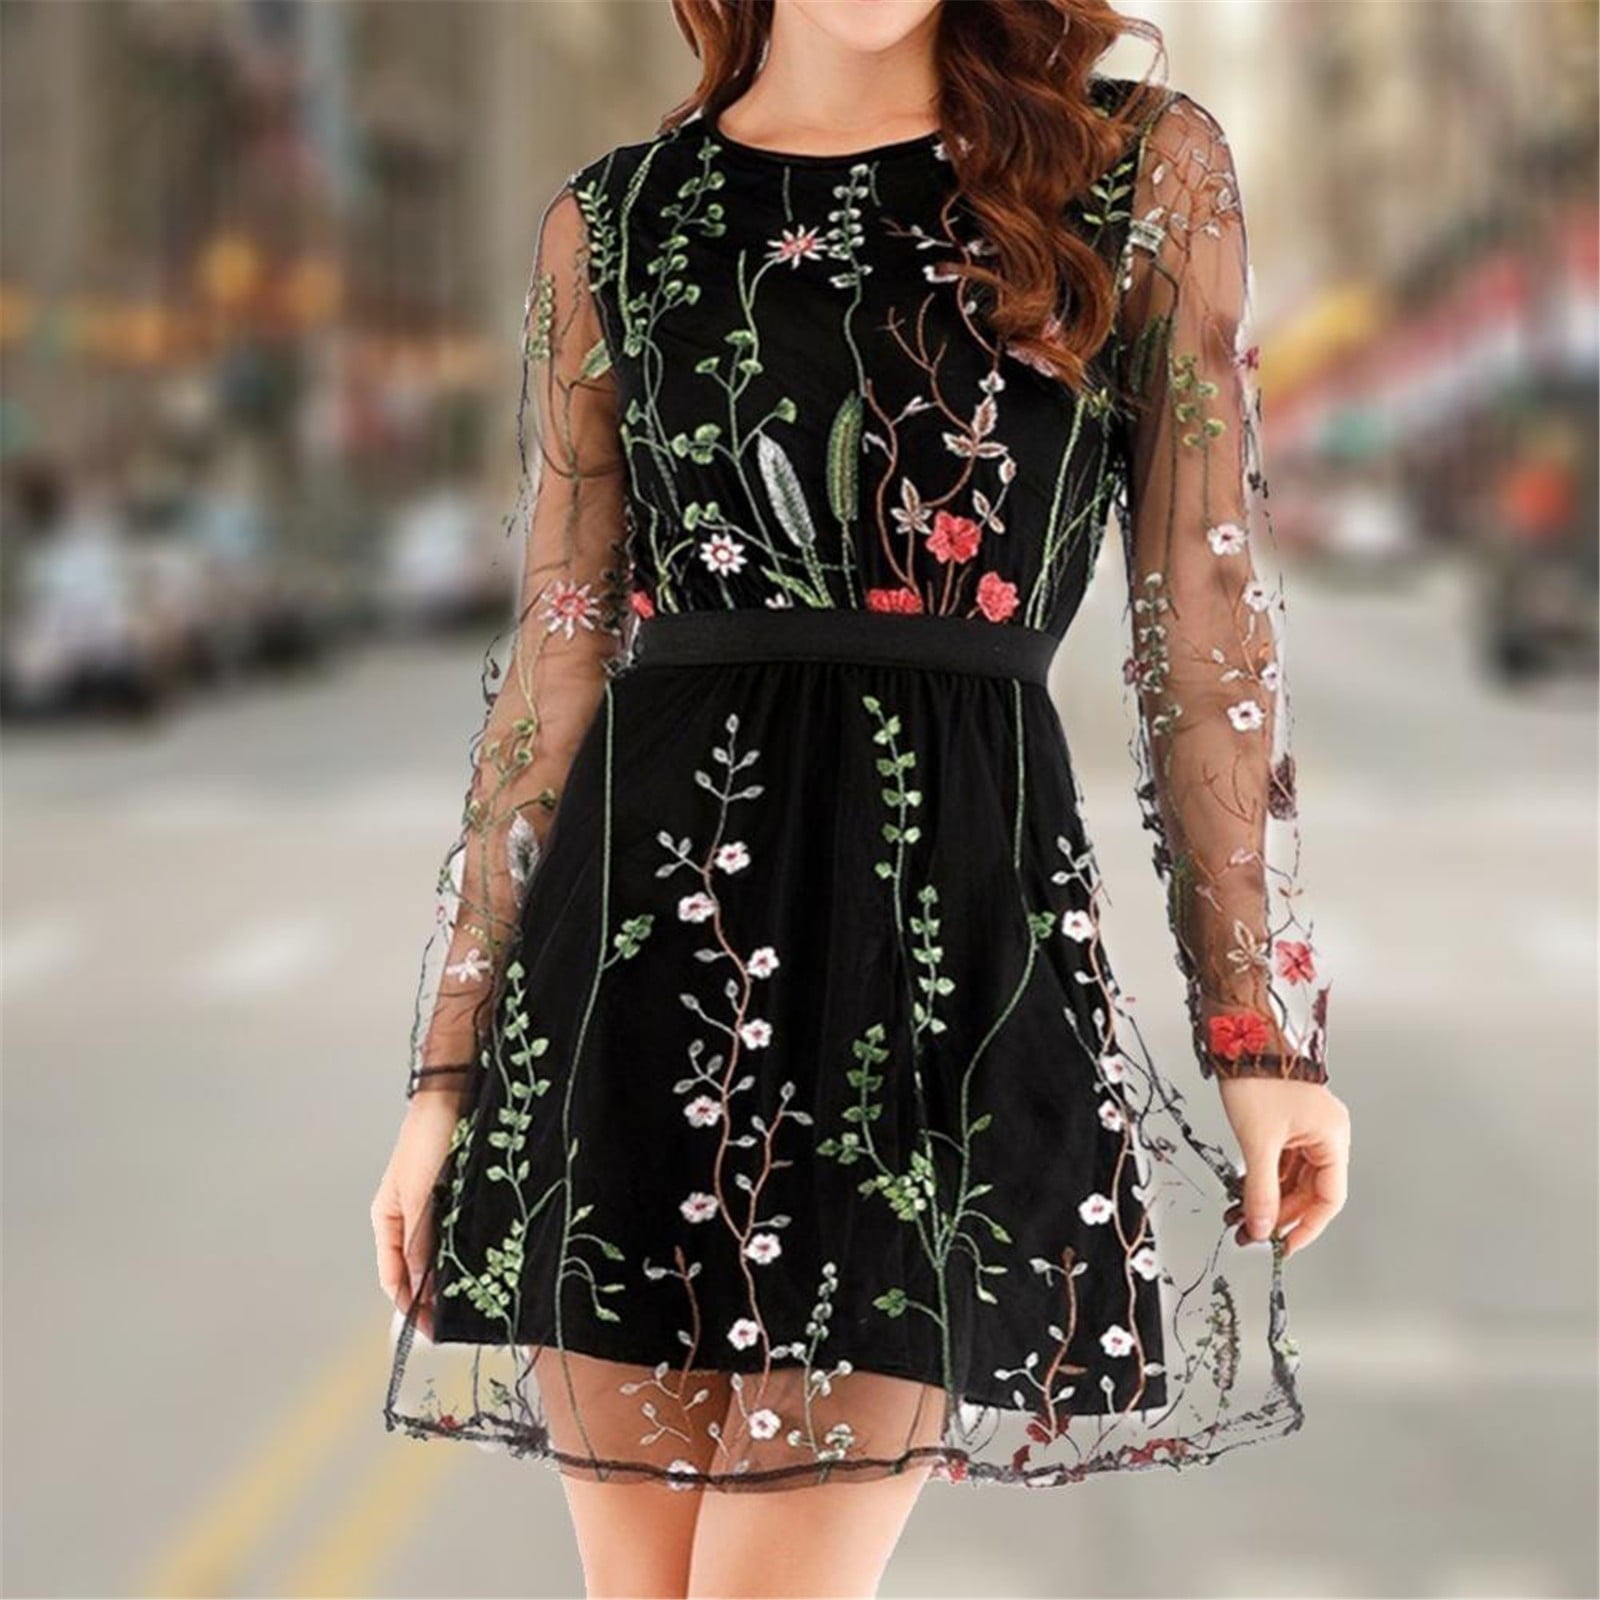 embroidered dresses women